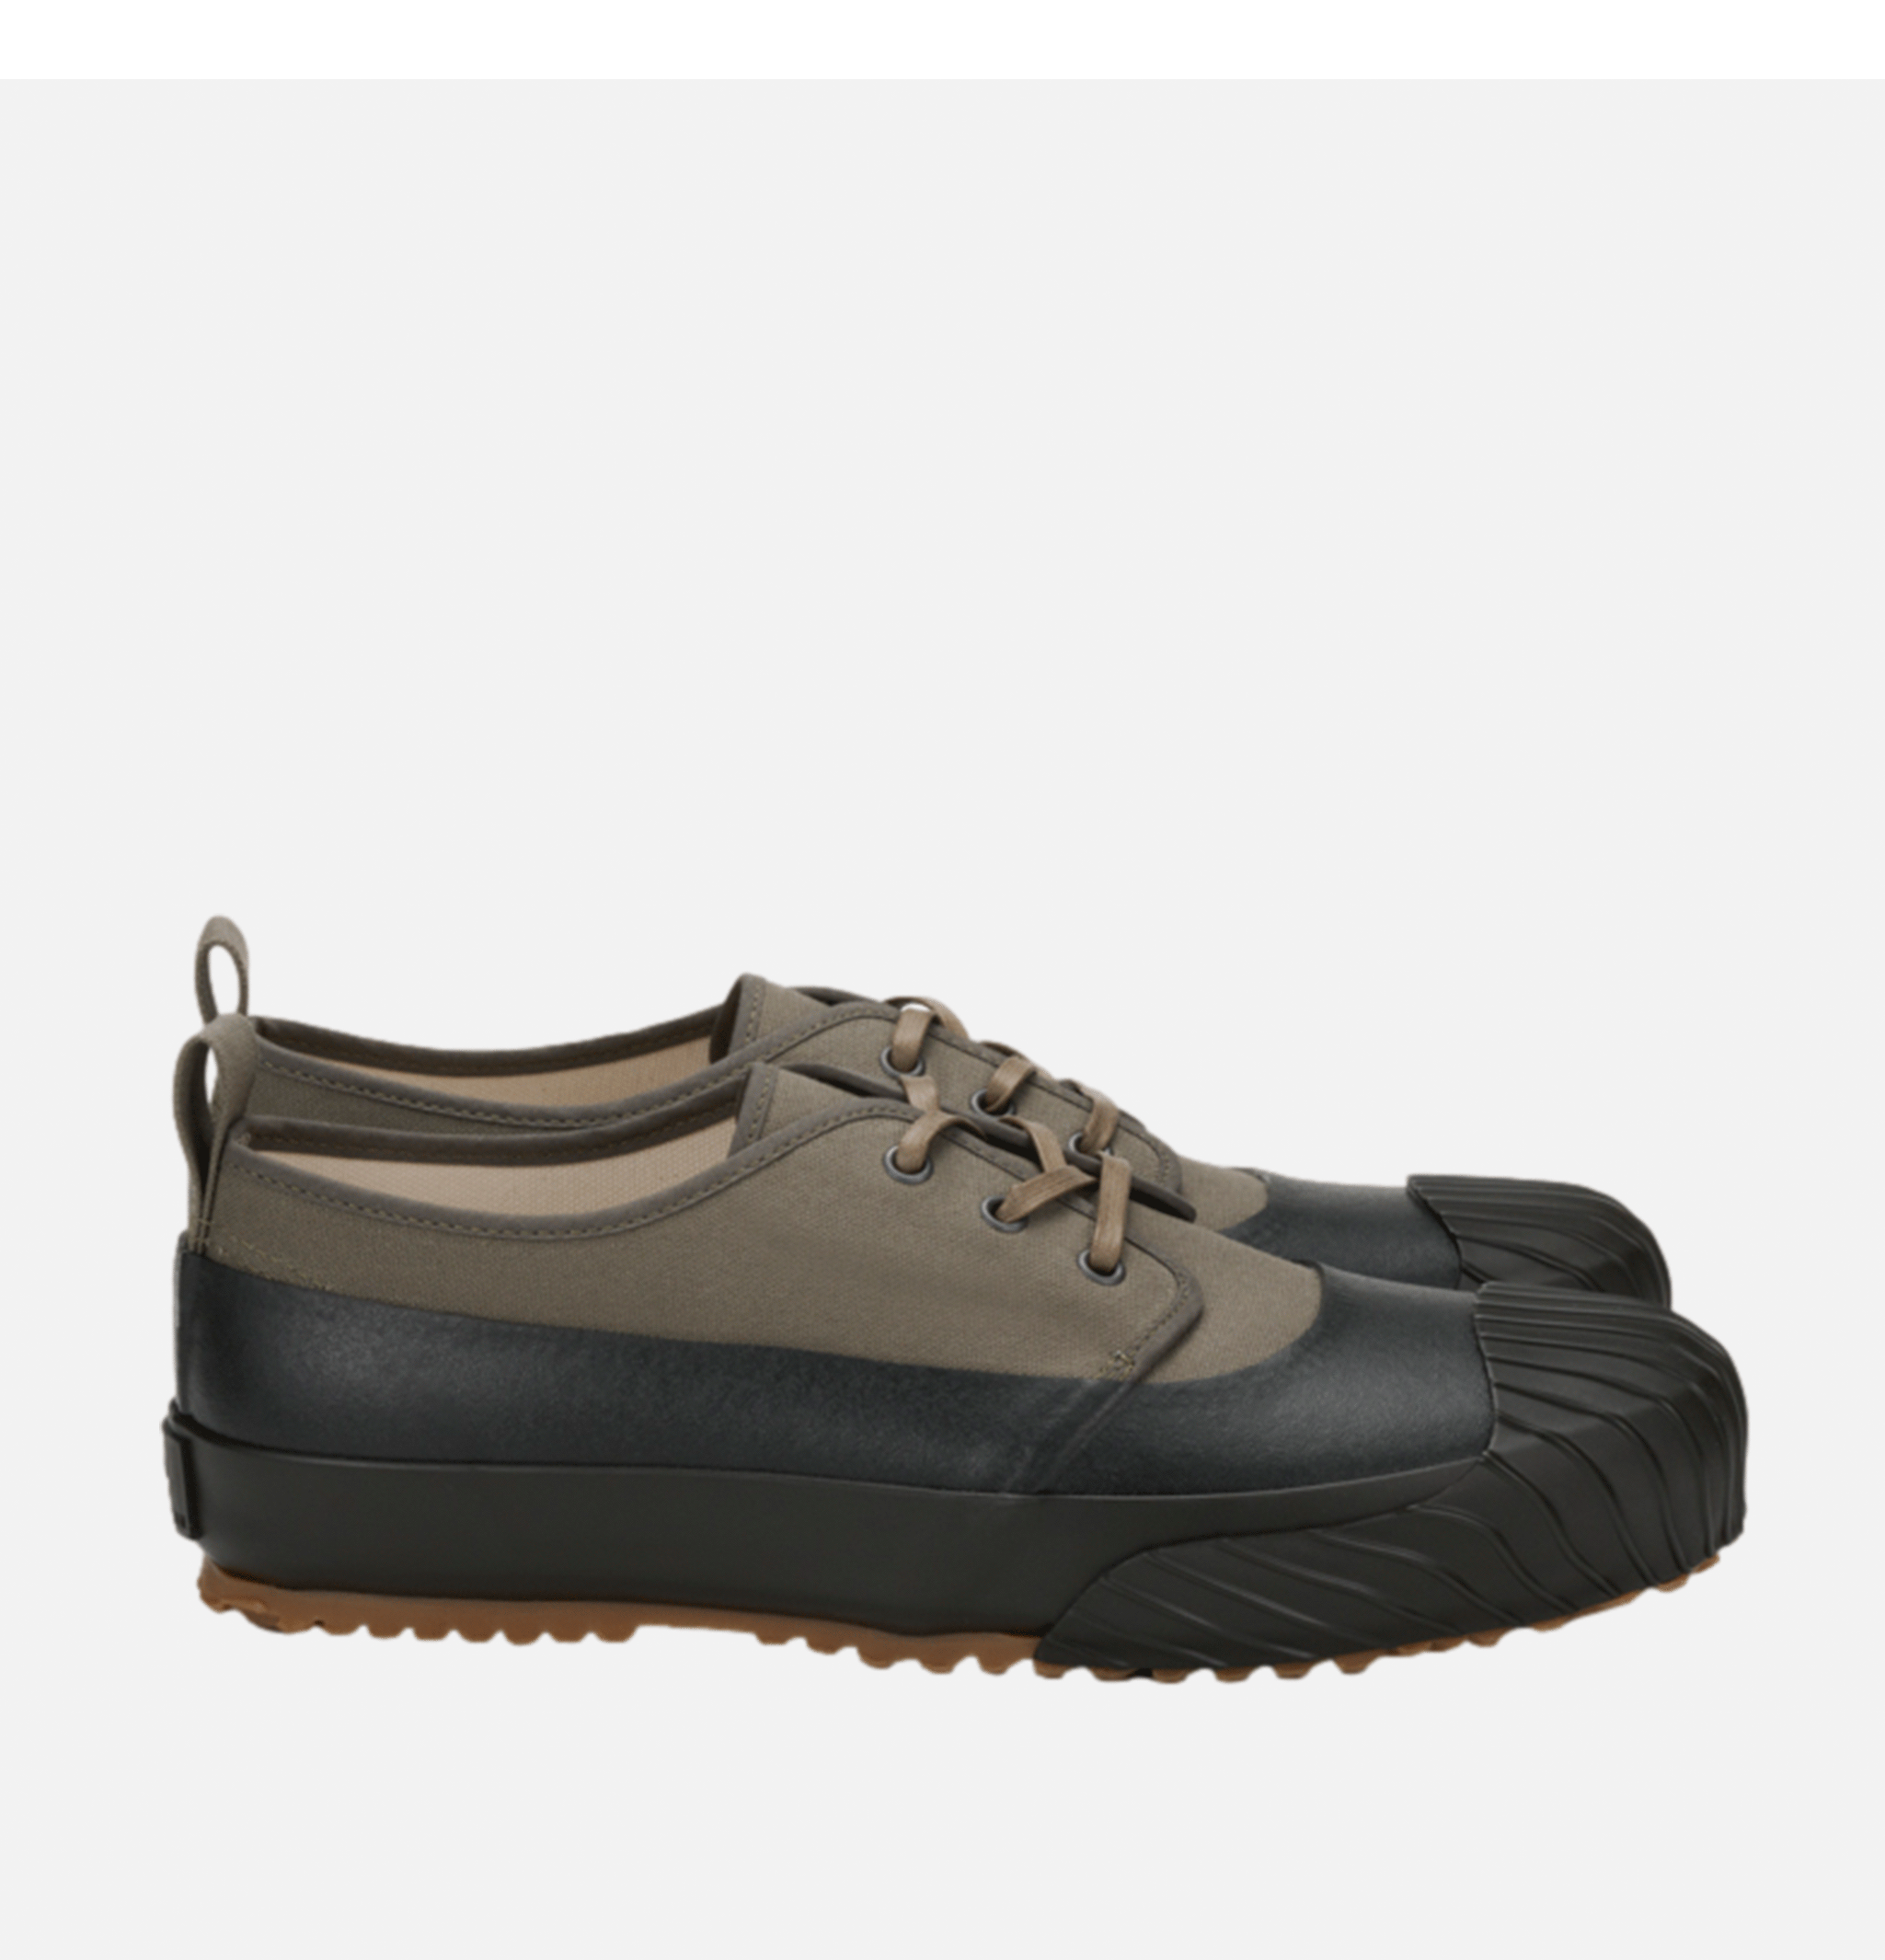 Moonstar Alweather Low Olive Chaussures